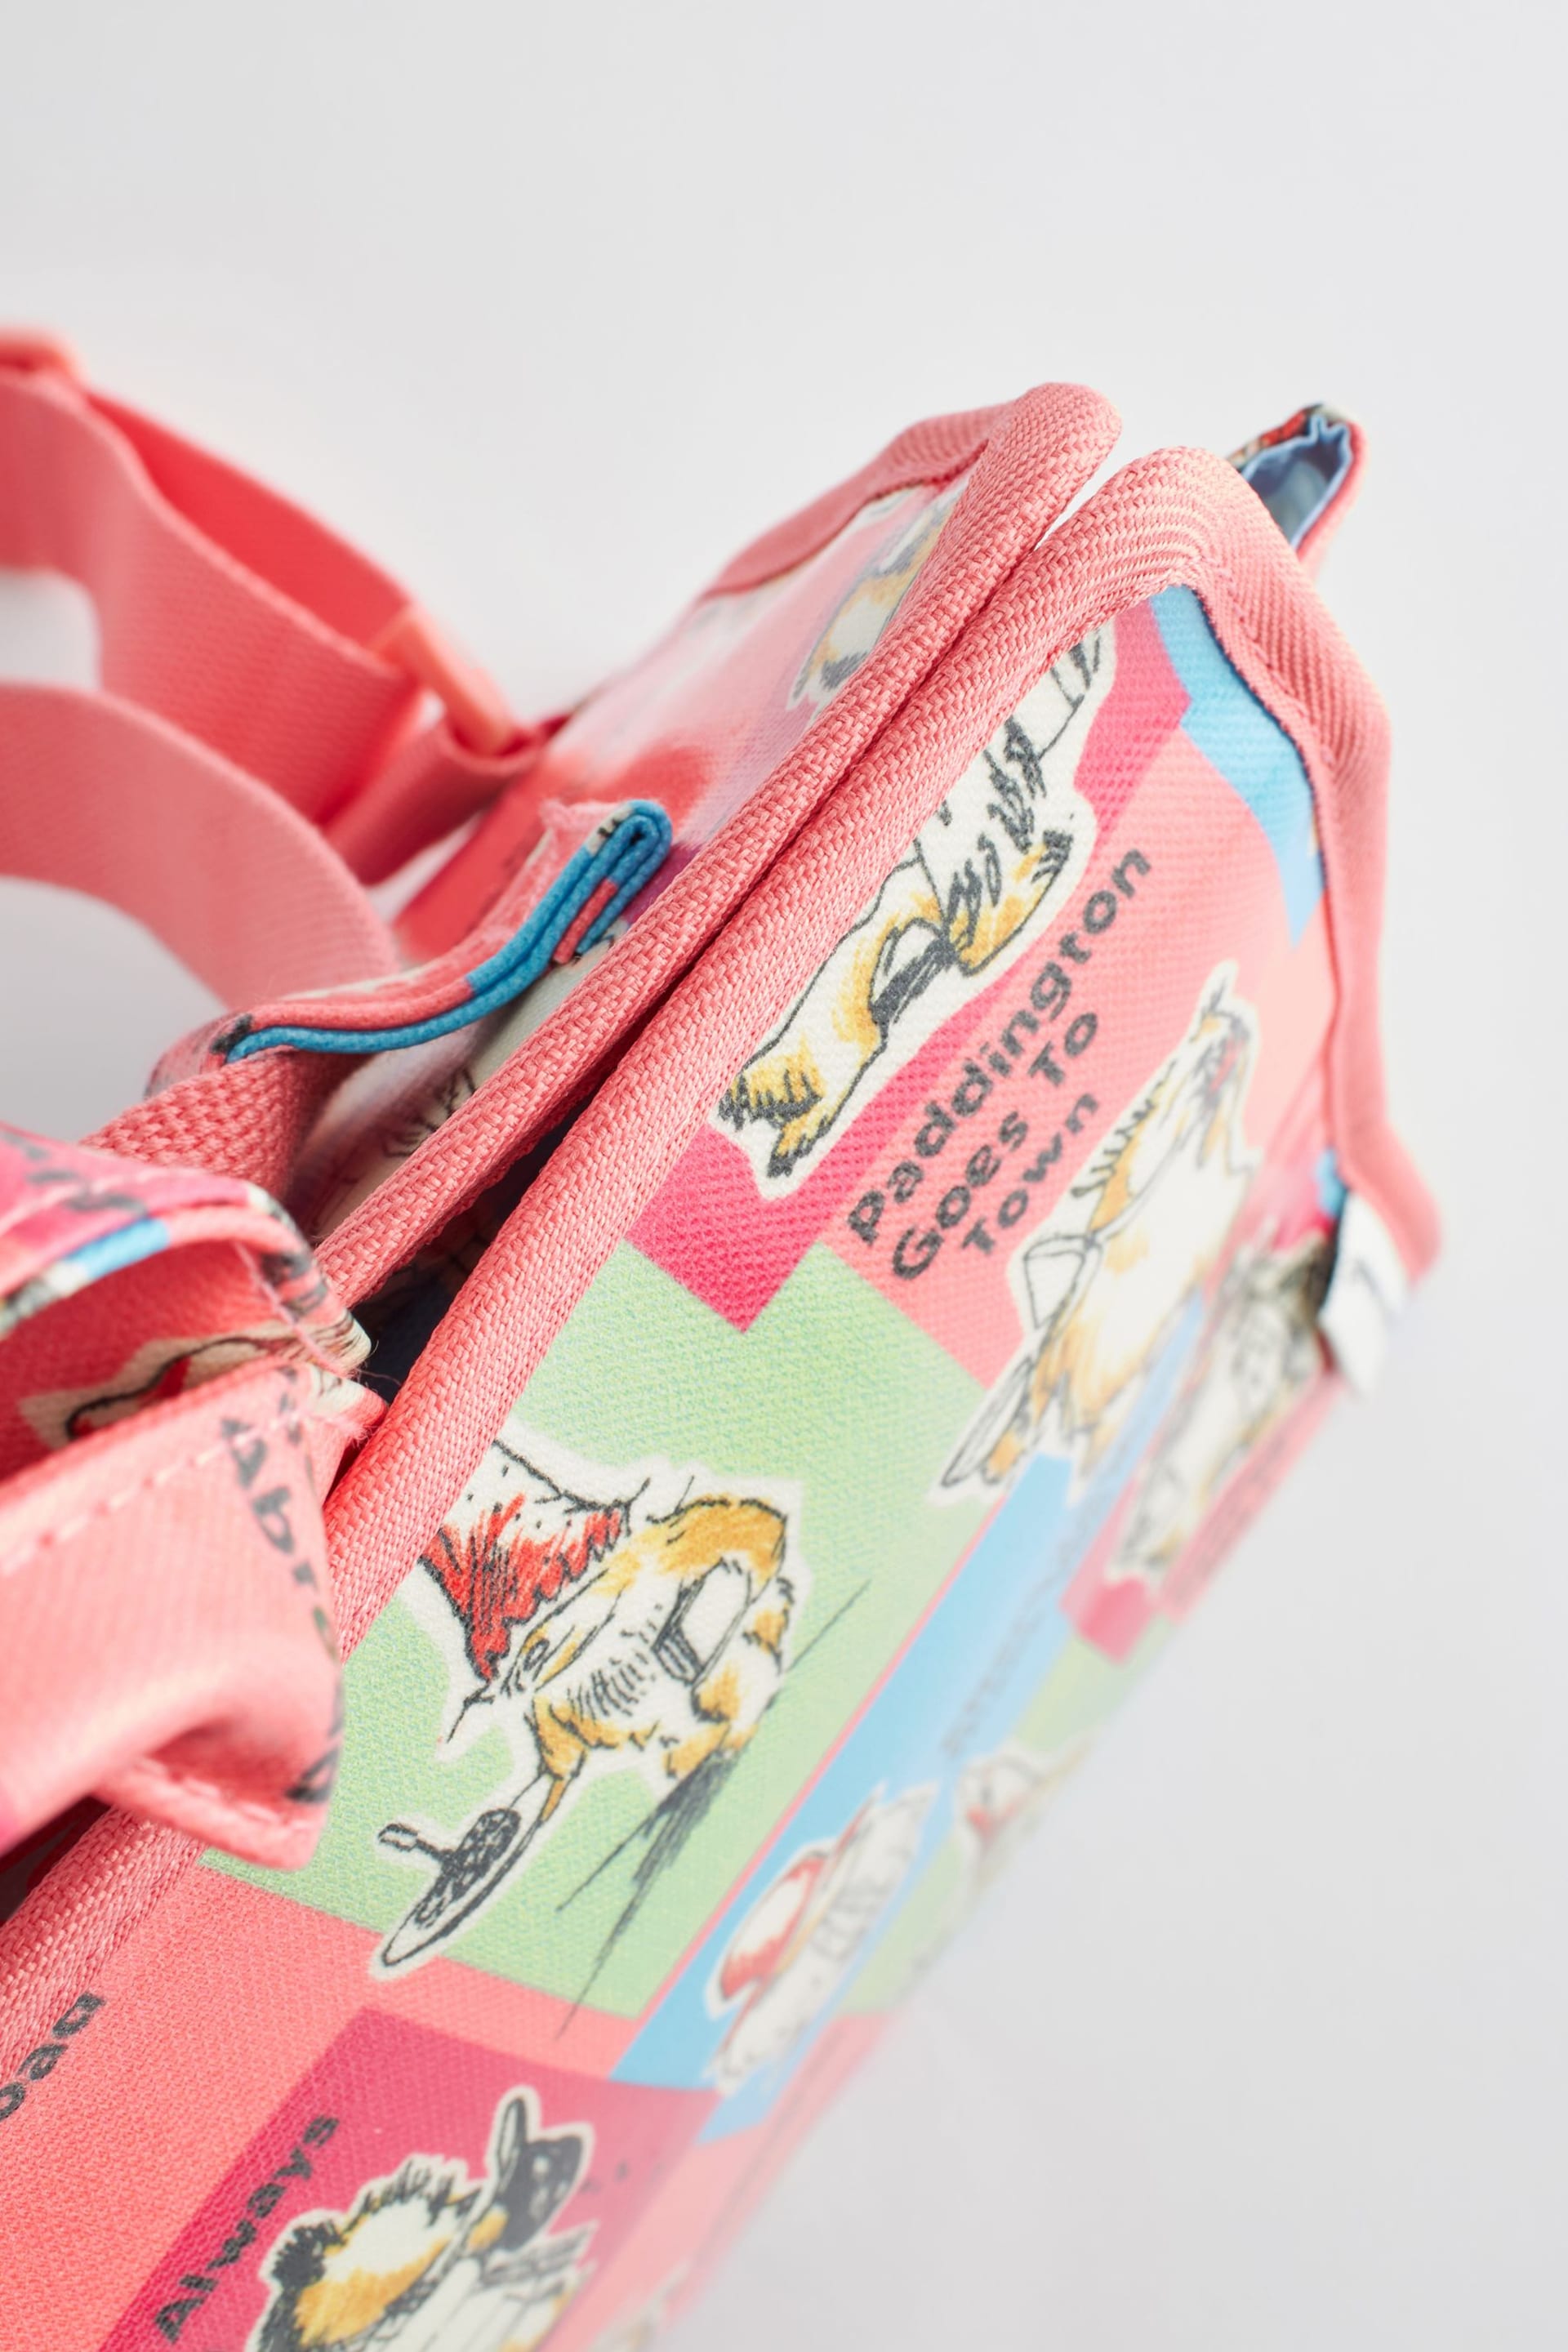 Cath Kidston Pink Paddington 2-In-1 Backpack - Image 12 of 14